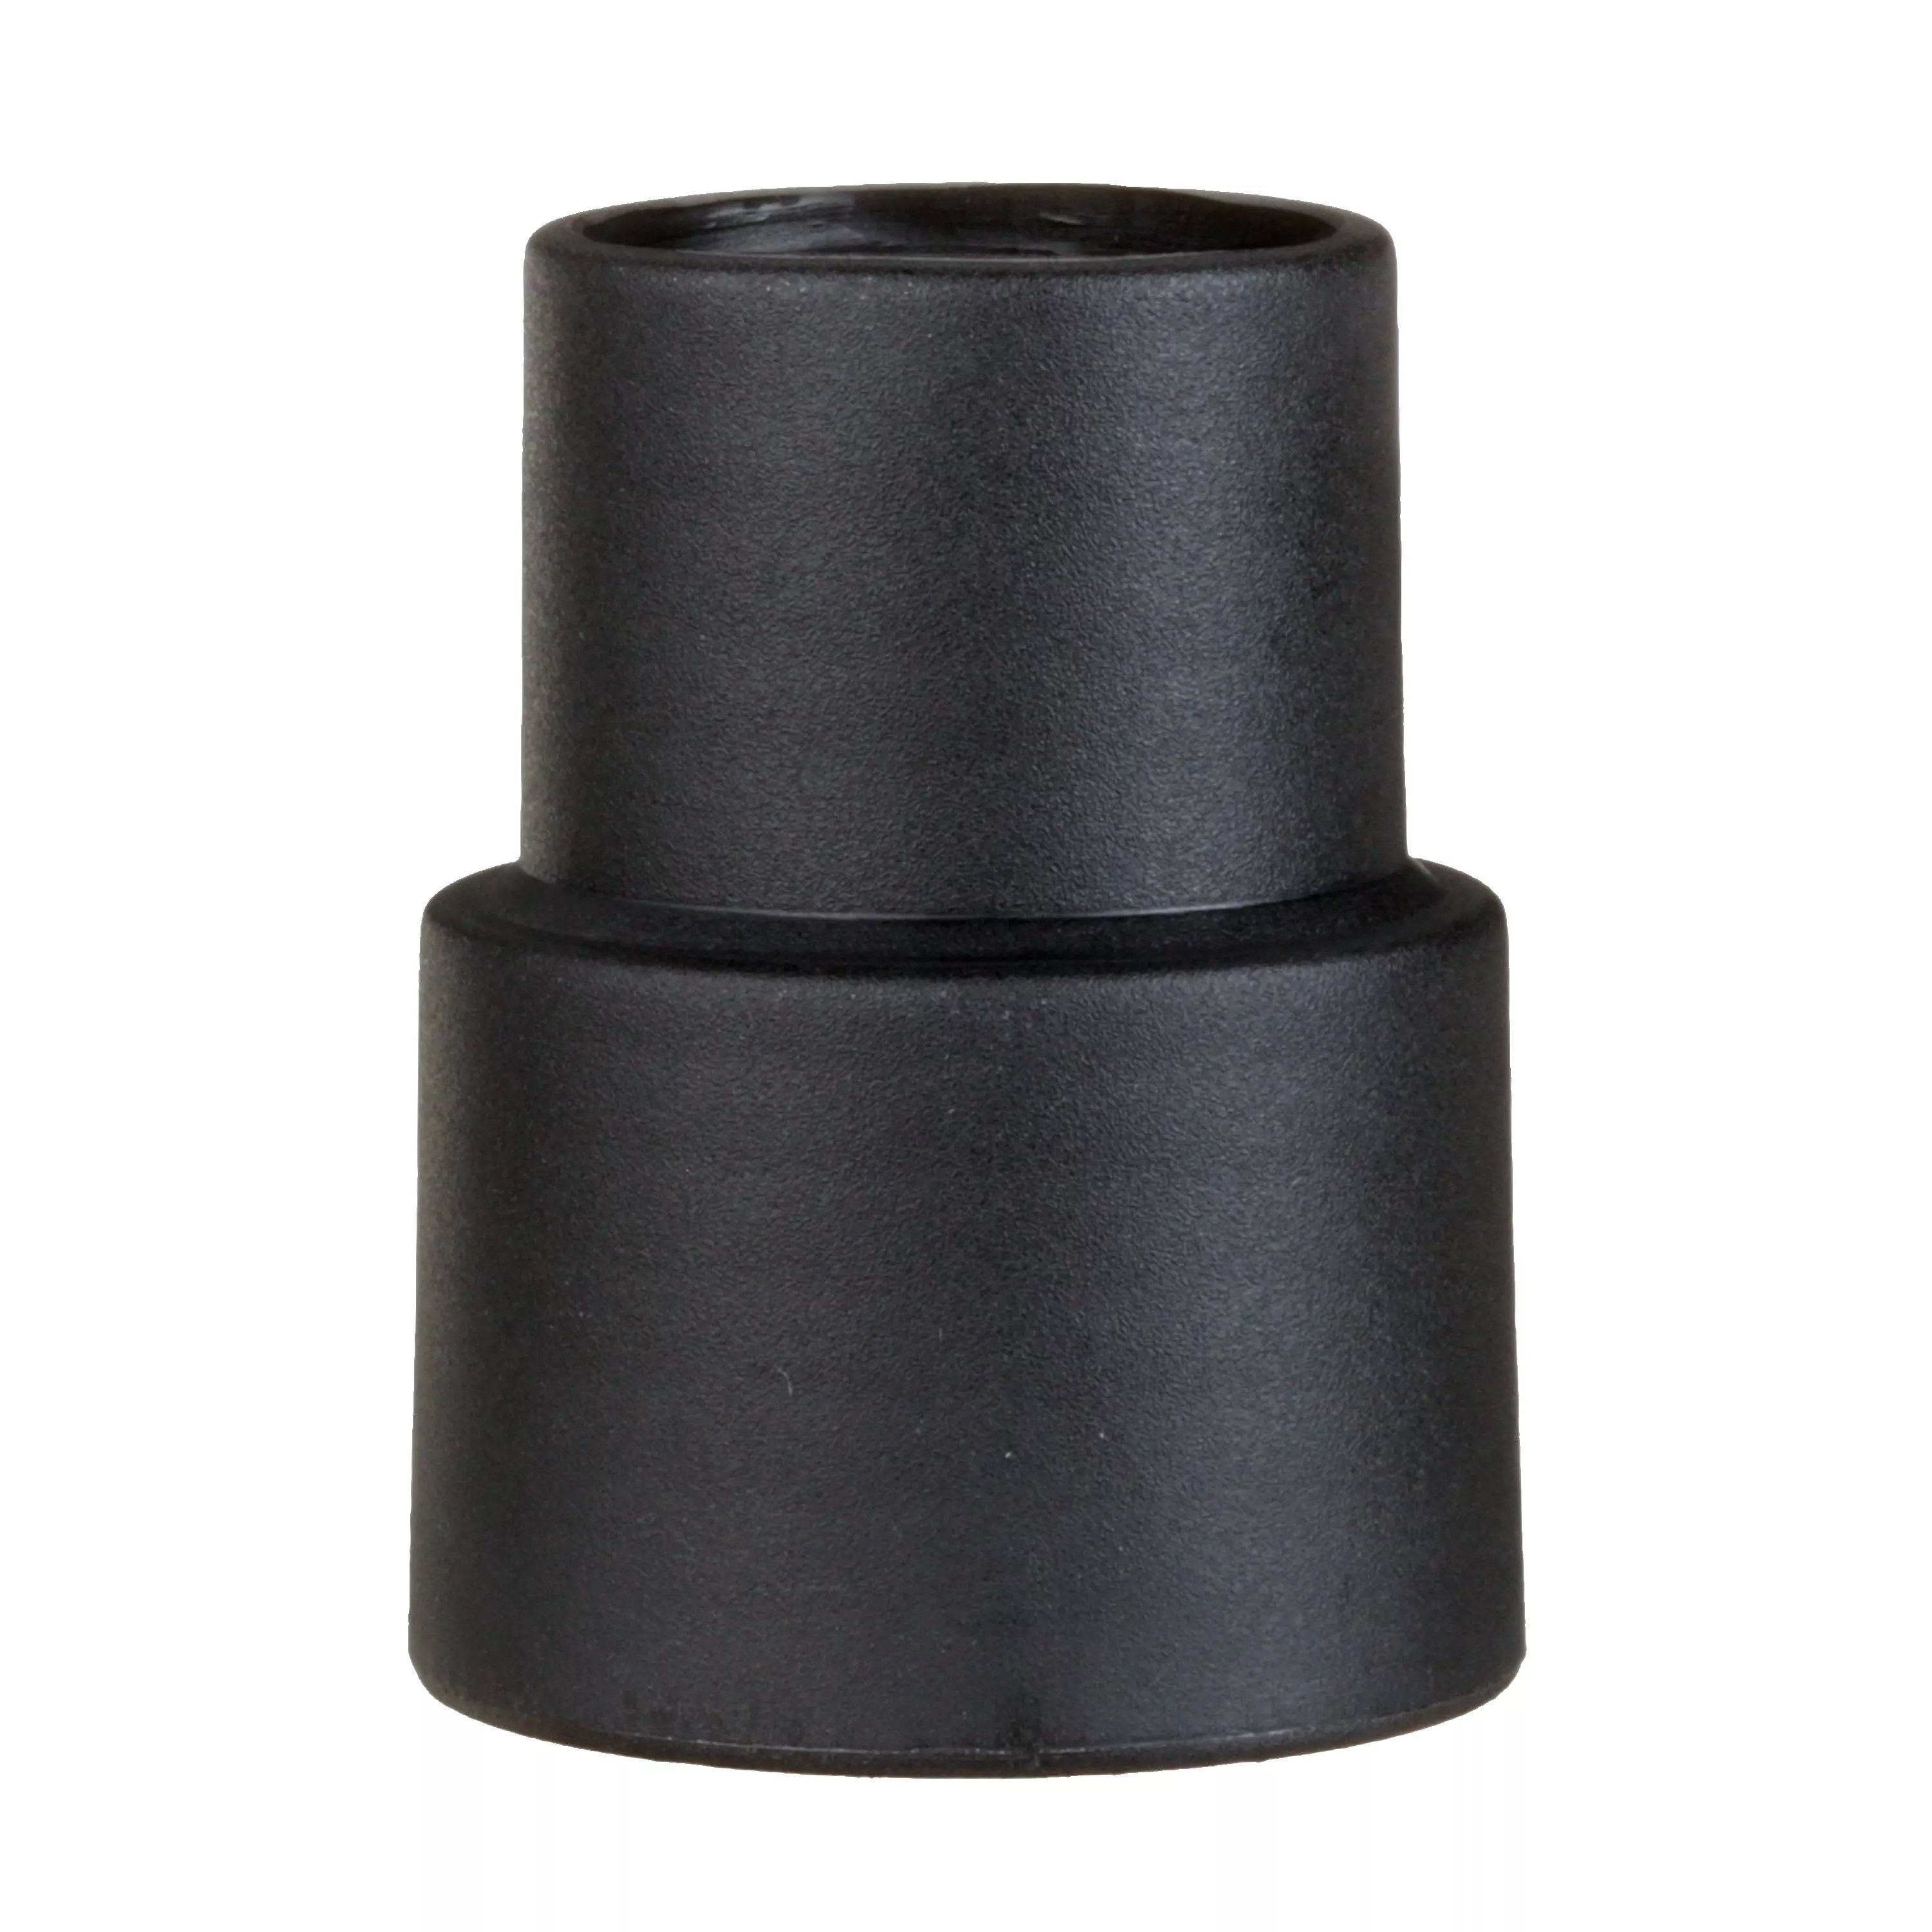 3M™ Vacuum Hose End Adapter 30324, 3/4 in to 1 in Hose Thread